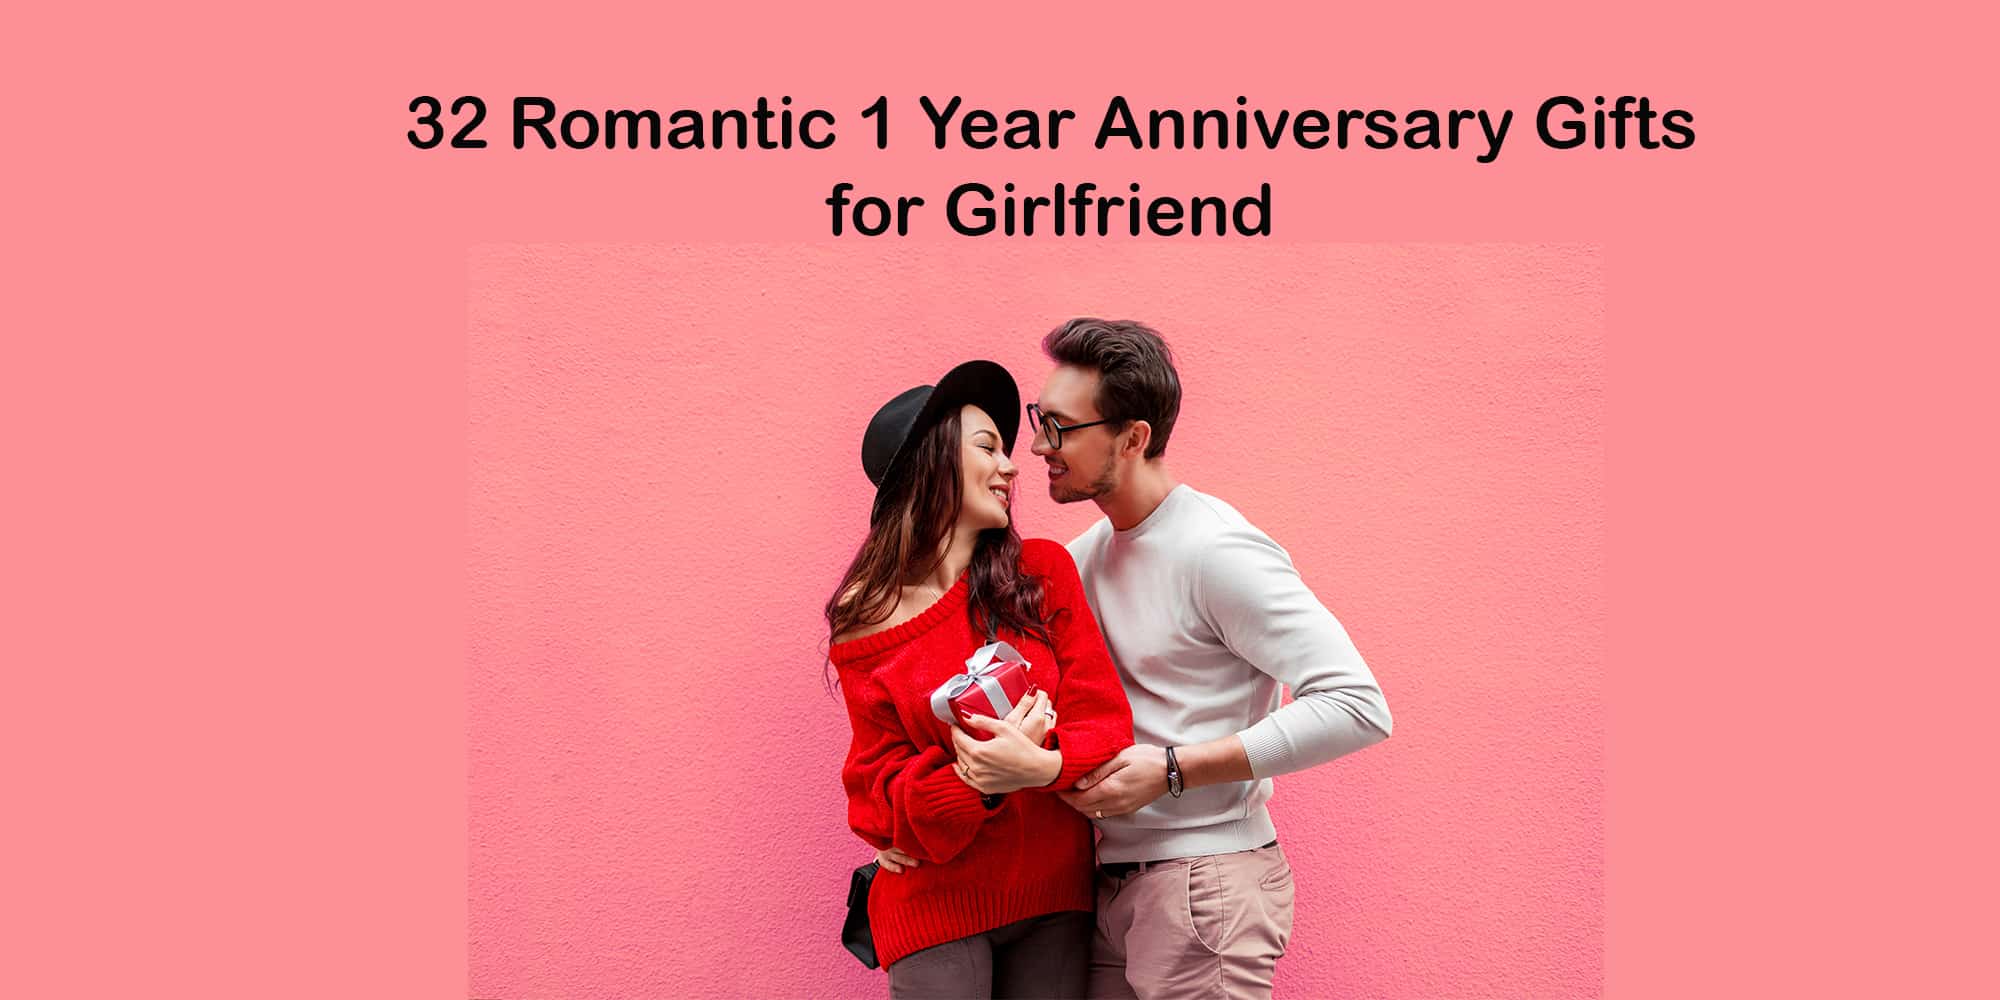 Gift ideas for dating year her first anniversary 